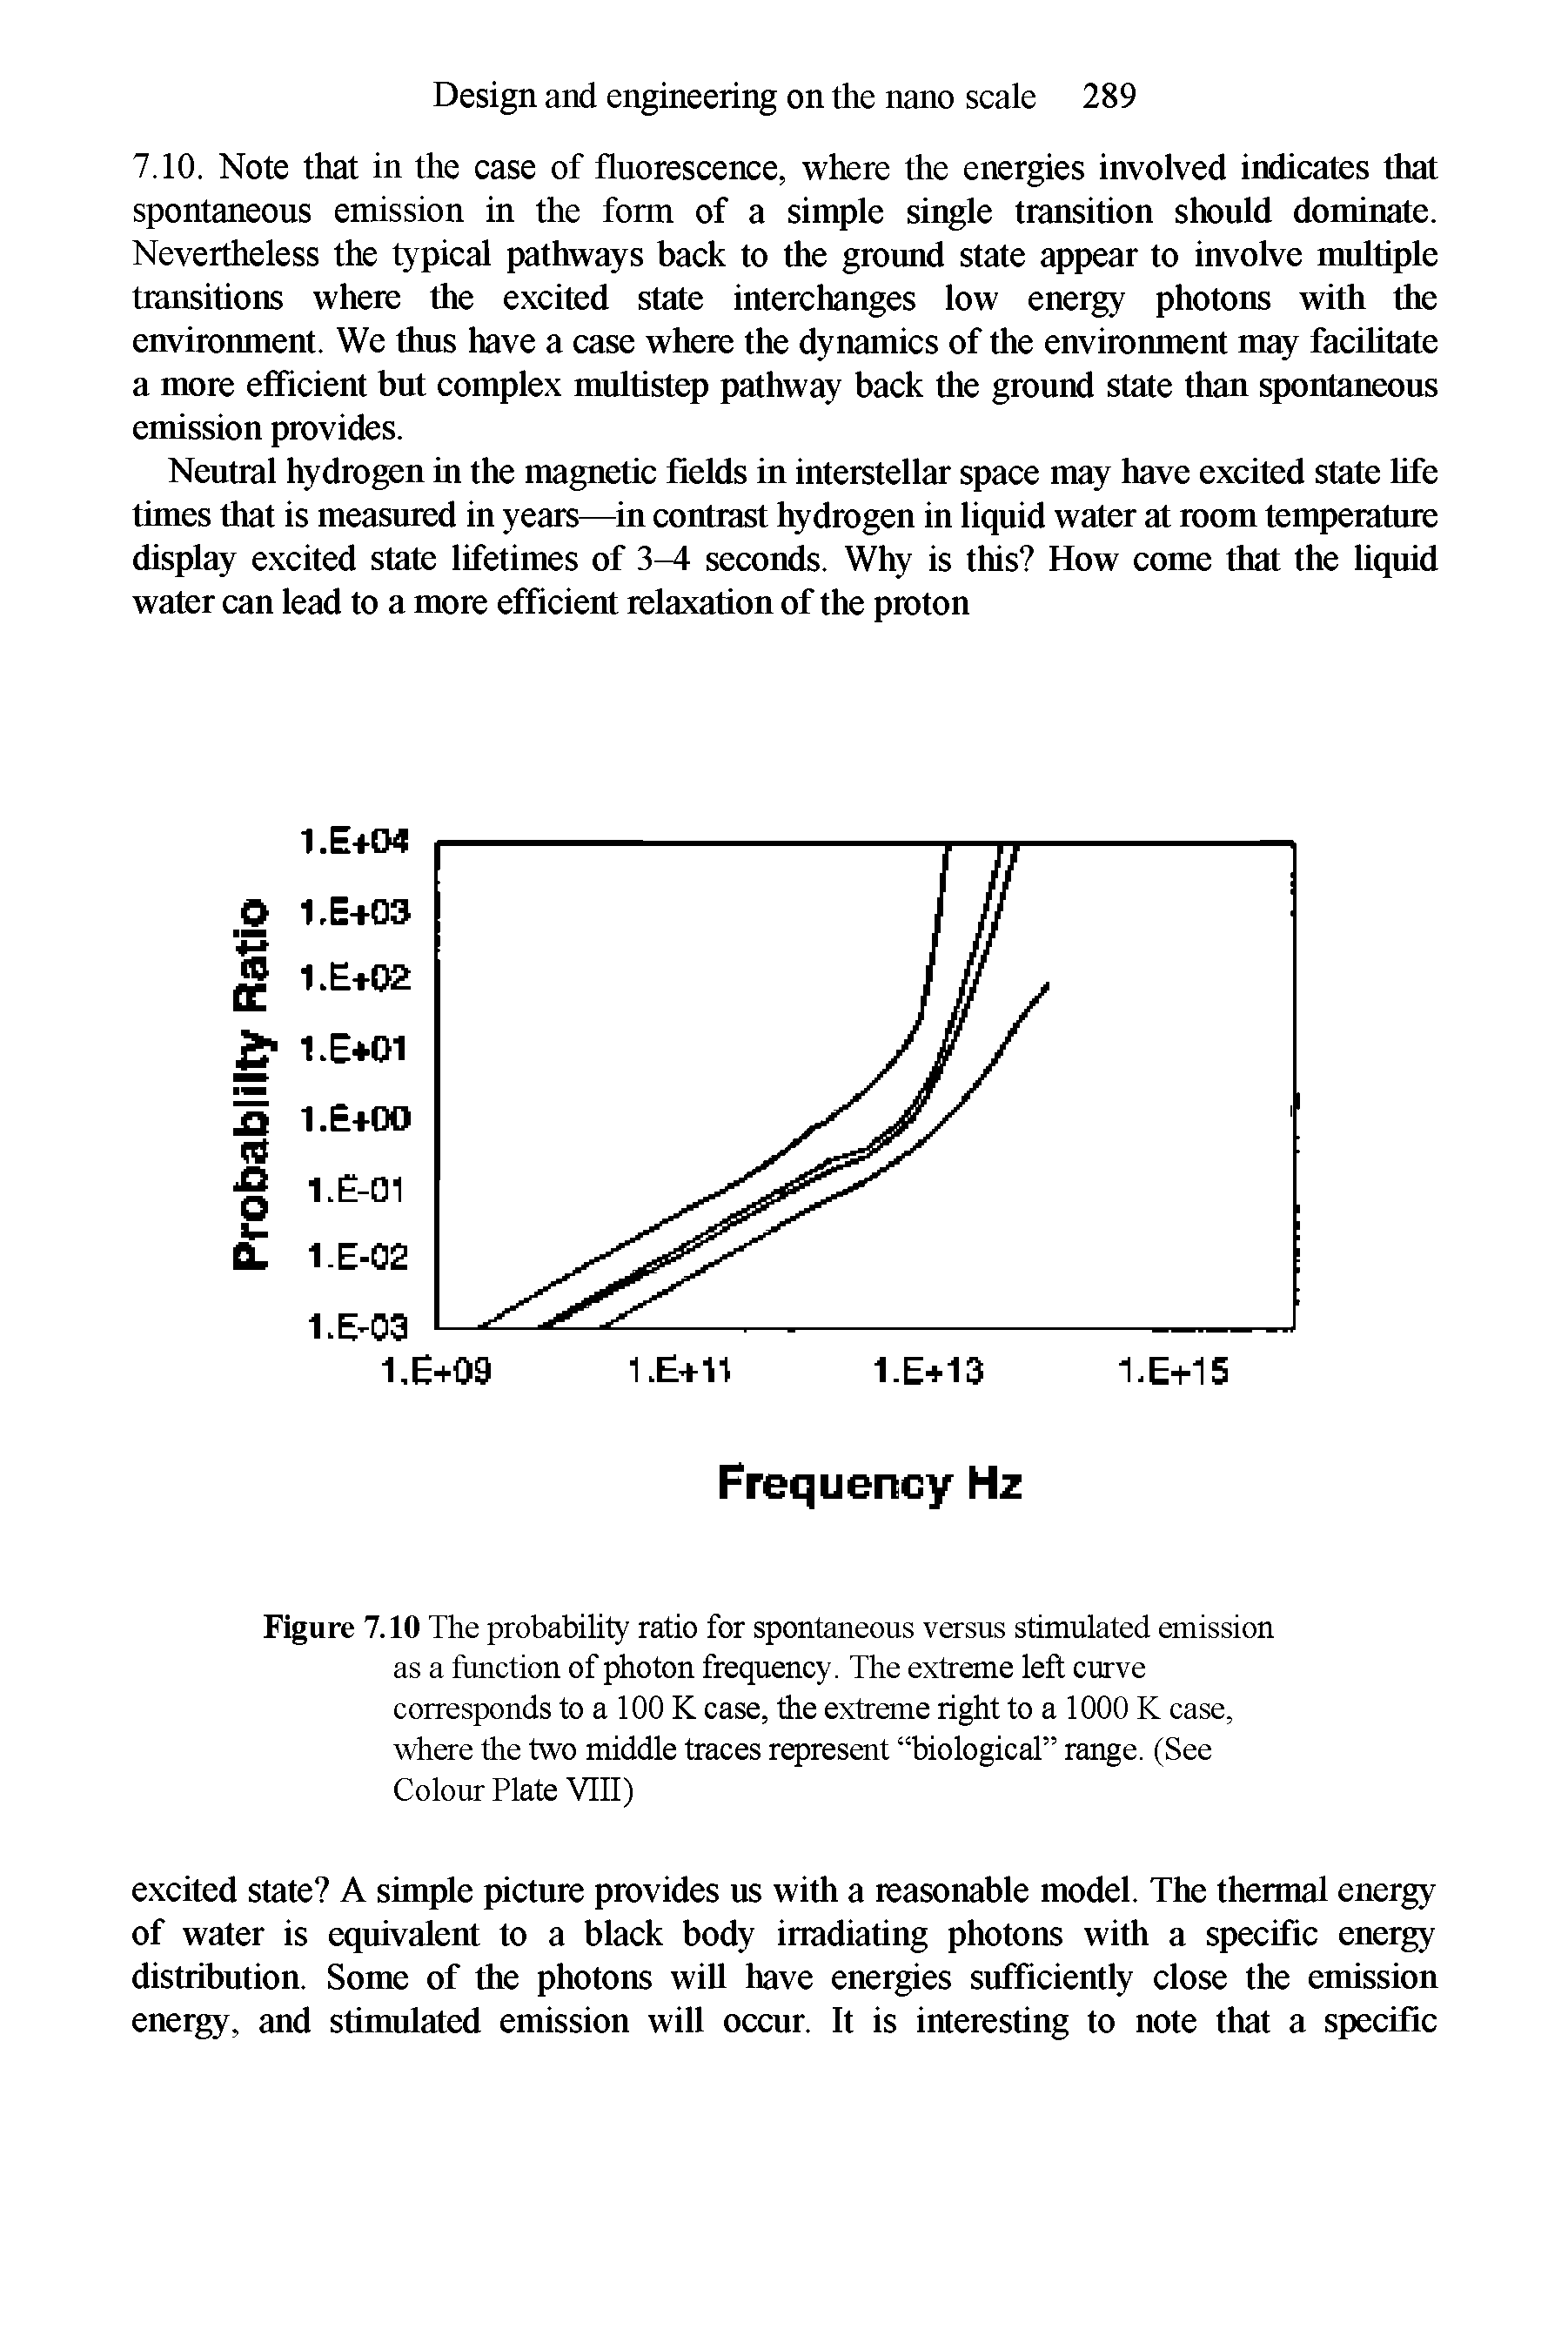 Figure 7.10 The probability ratio for spontaneous versus stimulated emission as a function of photon frequency. The extreme left curve corresponds to a 100 K case, the extreme right to a 1000 K case, where the two middle traces represent biological range. (See Colour Plate VIII)...